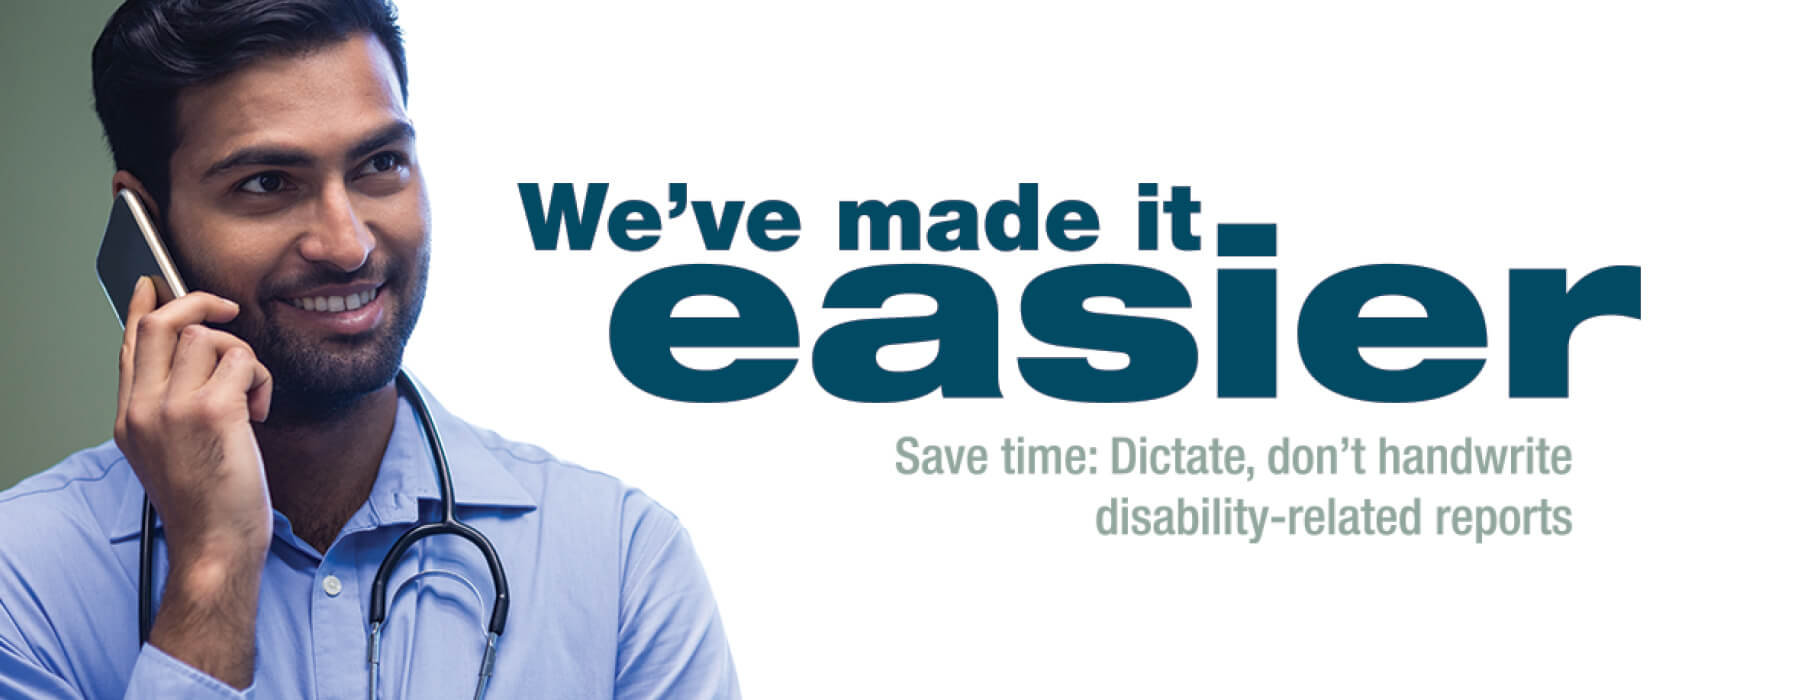 Save time: Dictate, don’t handwrite, disability-related reports